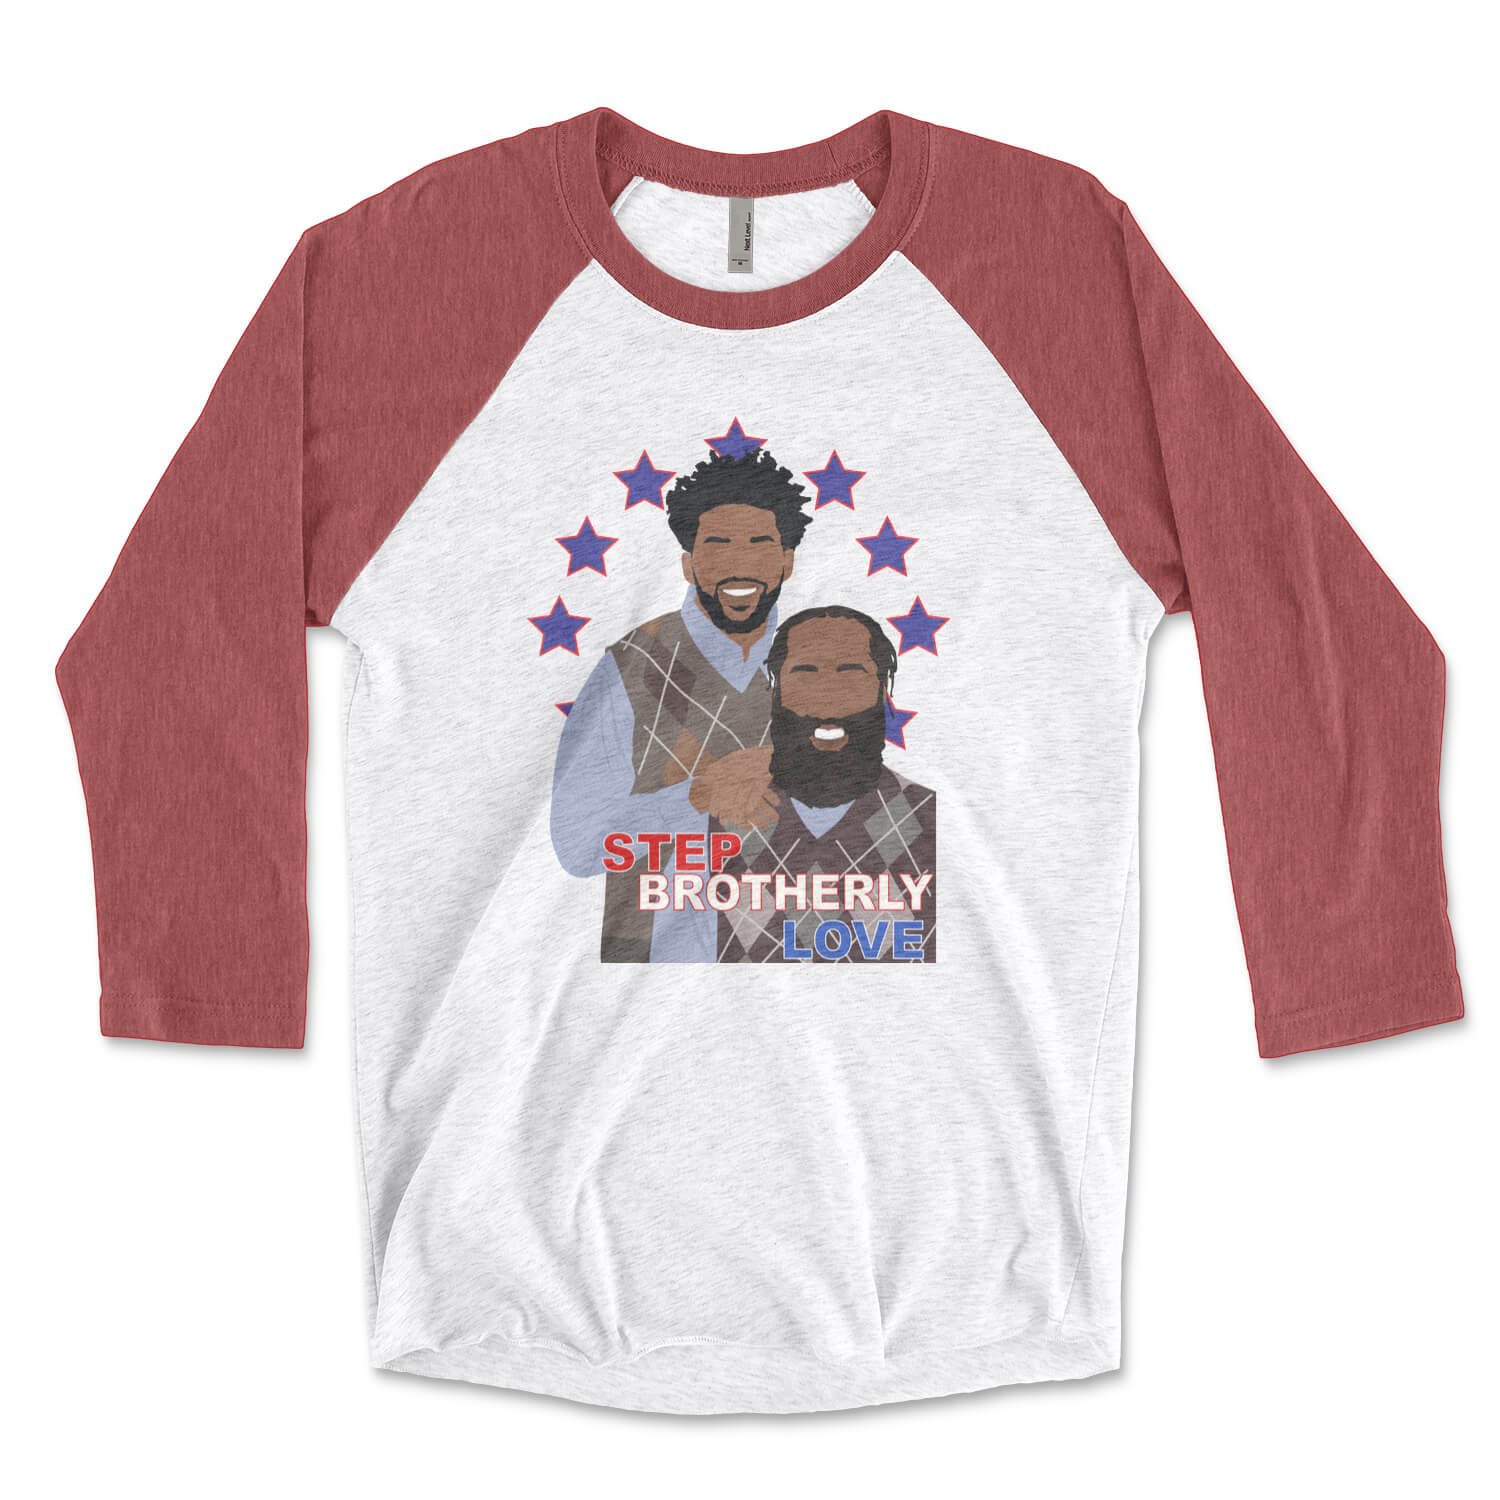 Philadelphia 76ers Joel Embiid & James Harden Step Brothers Sixers red & white raglan t-shirt from Phillygoat